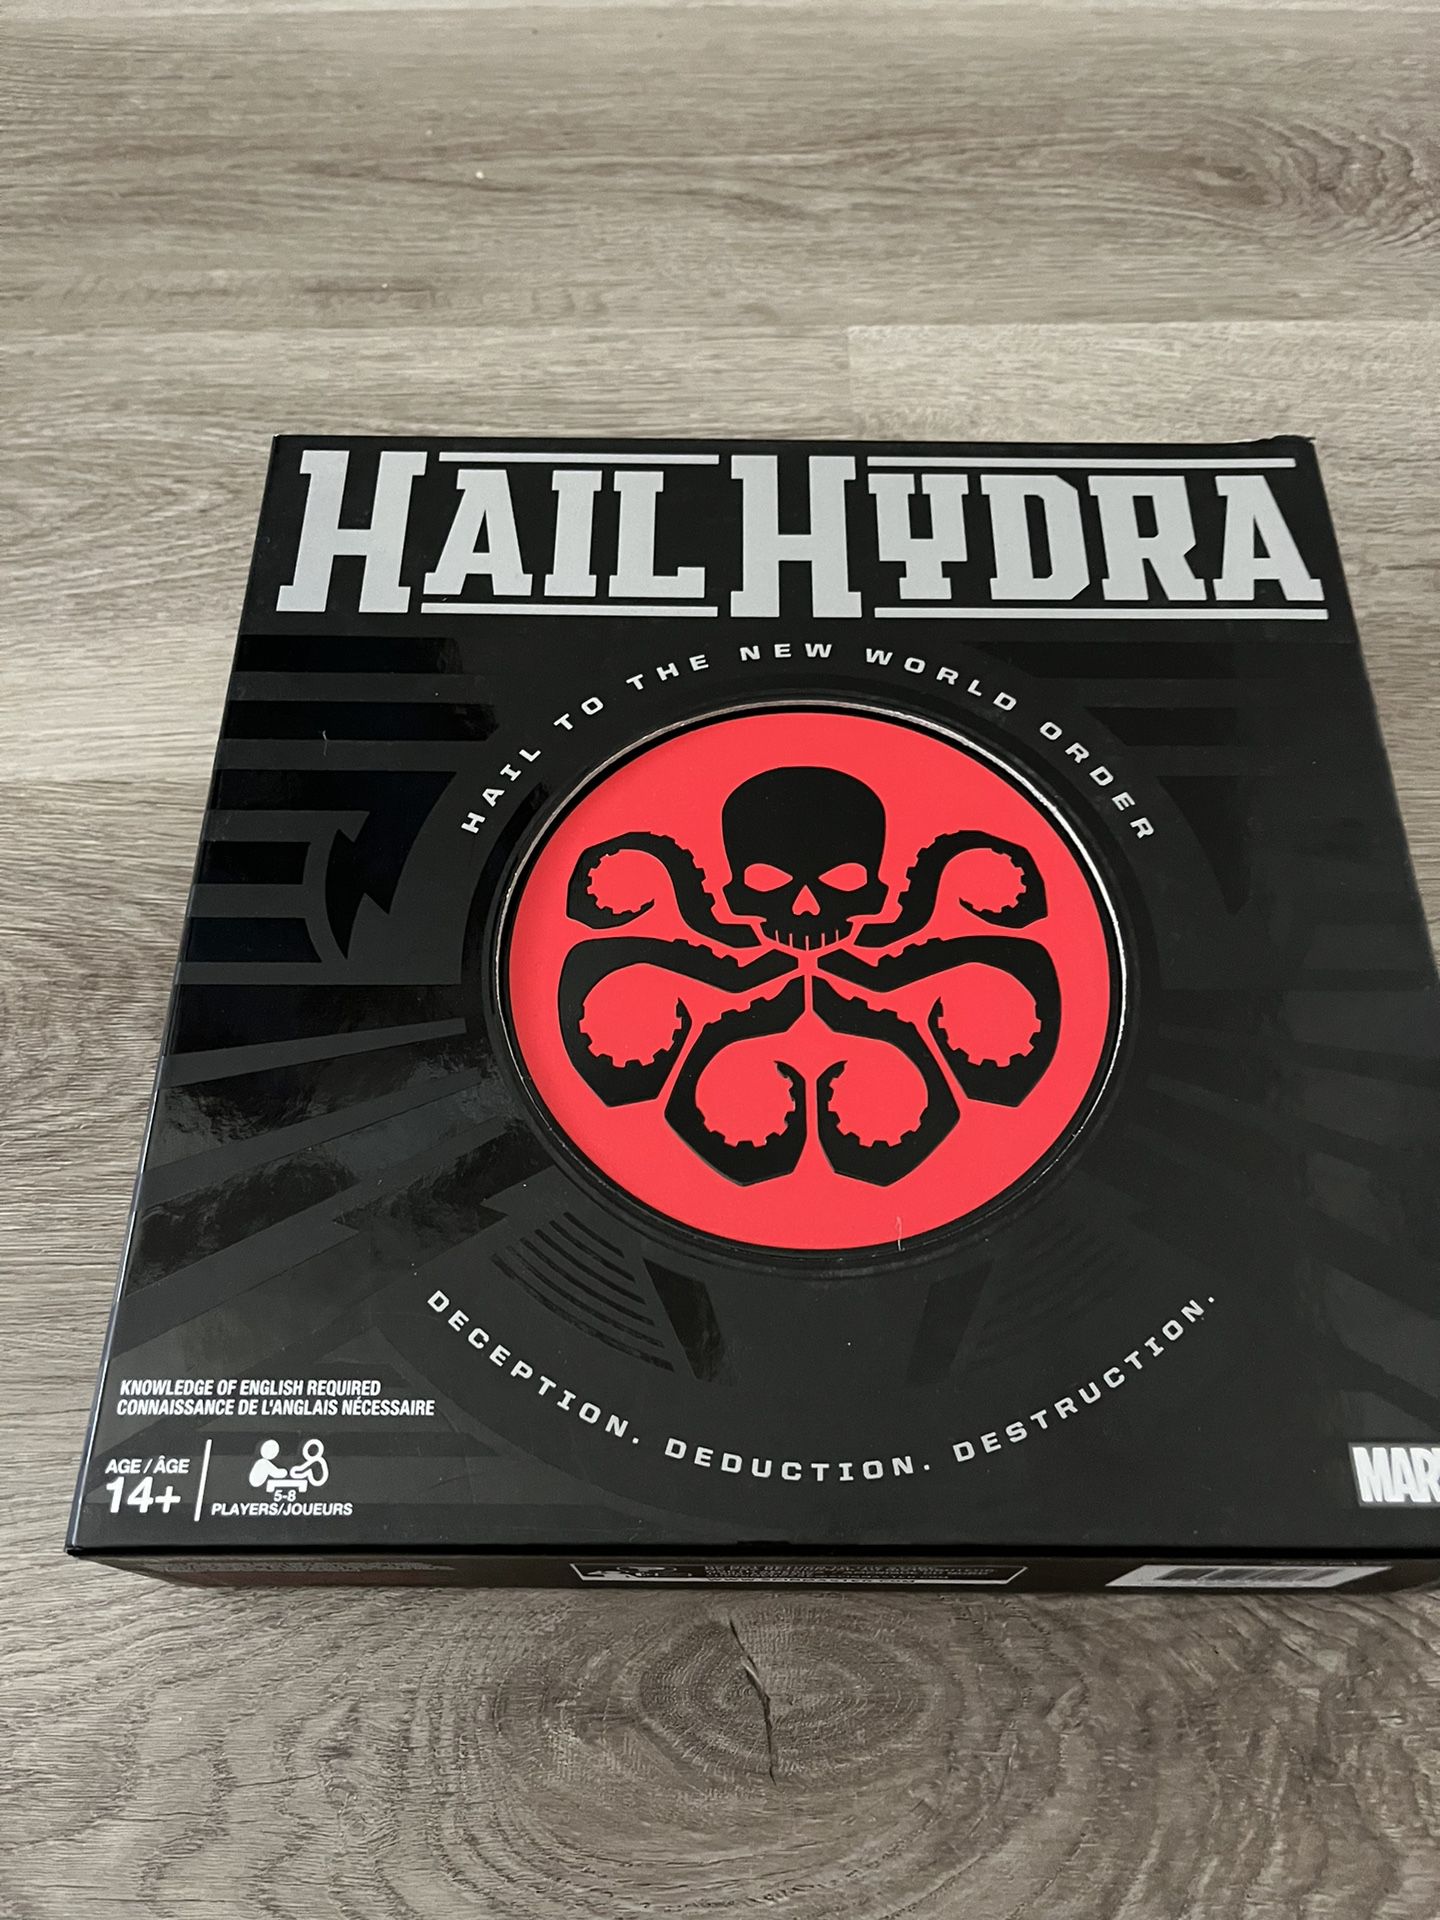 Marvel, Hail Hydra Superhero Board Game Black Panther Hulk Captain America Red Skull Black Widow Spiderman, for Adults and Teens Ages 14 and up